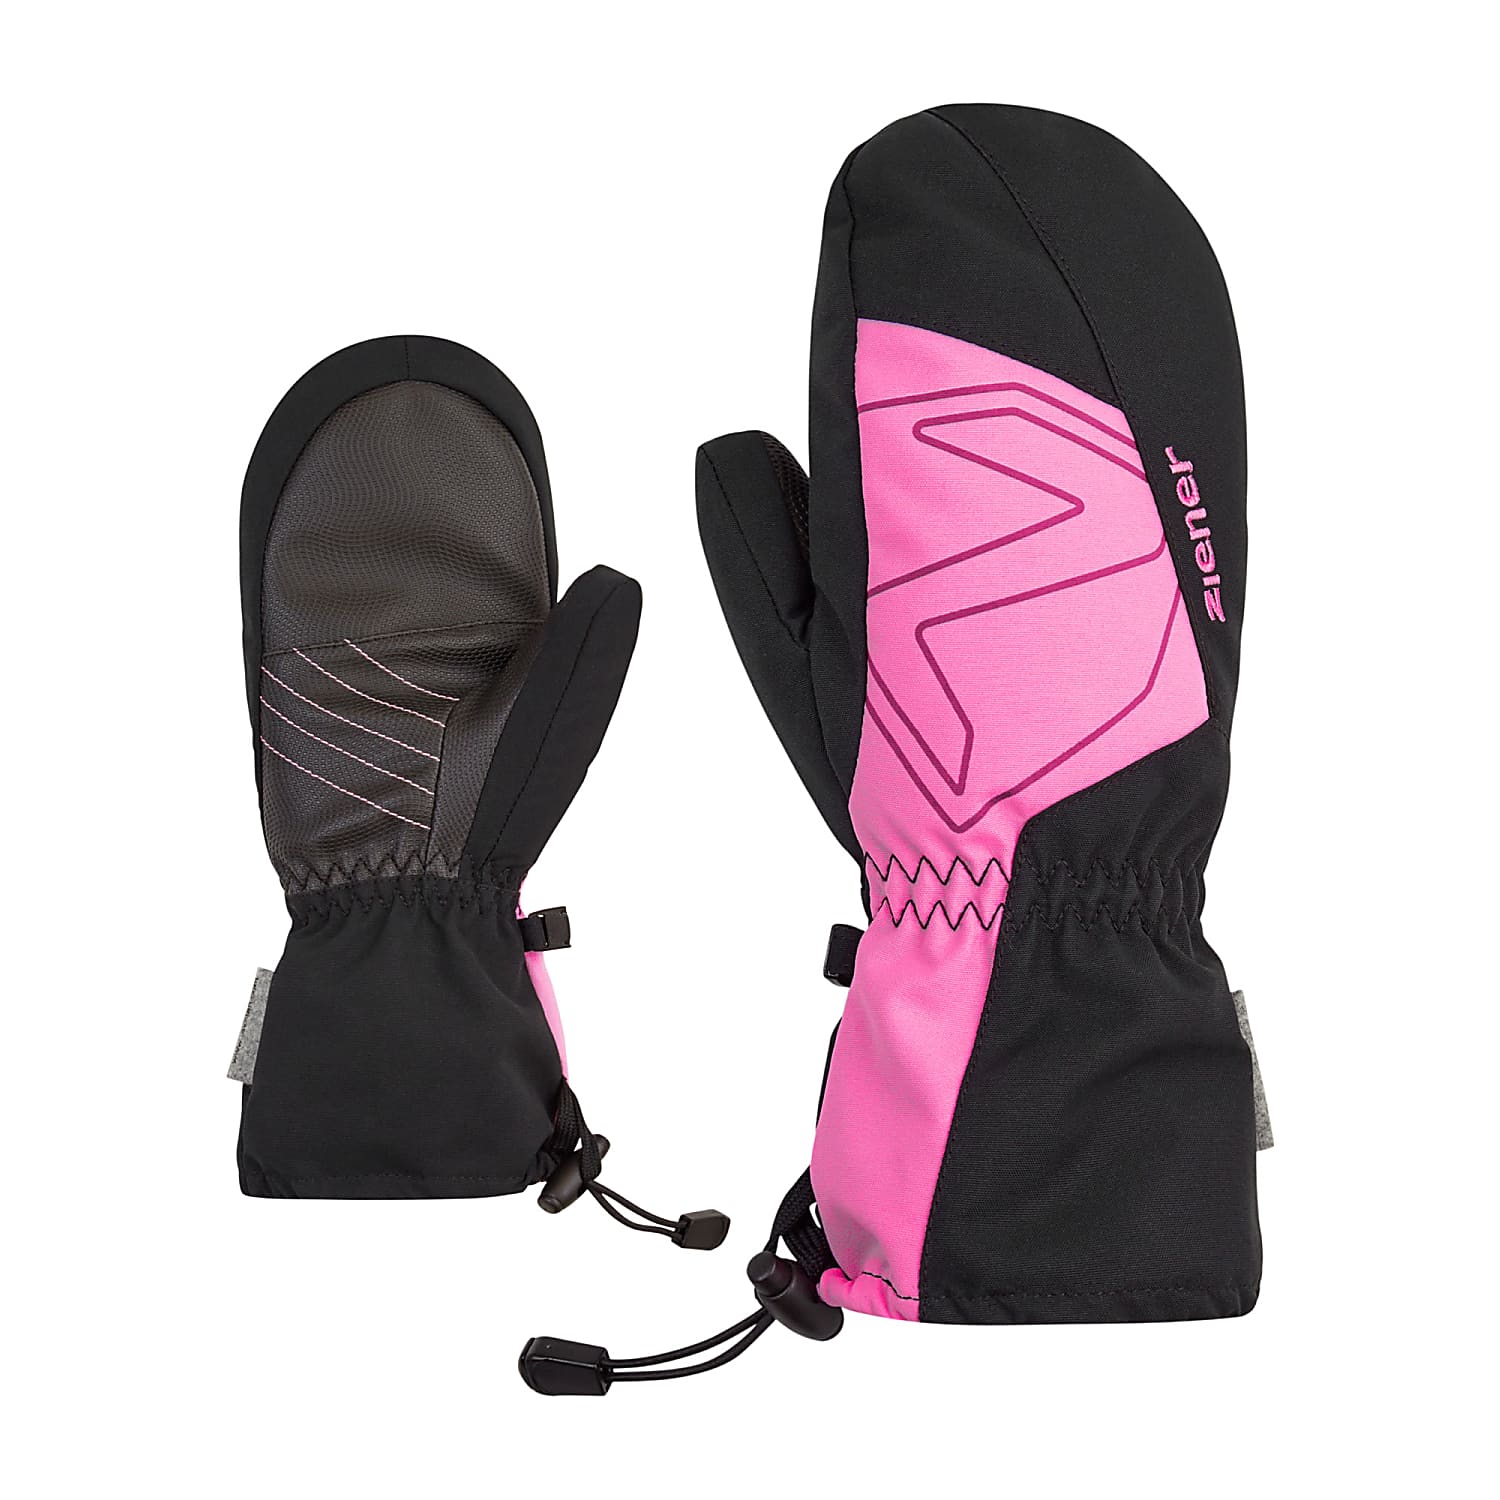 MITTEN, Fast AW LAVALINO Black - Ziener JUNIOR AS Fuchsia and Pink cheap shipping -